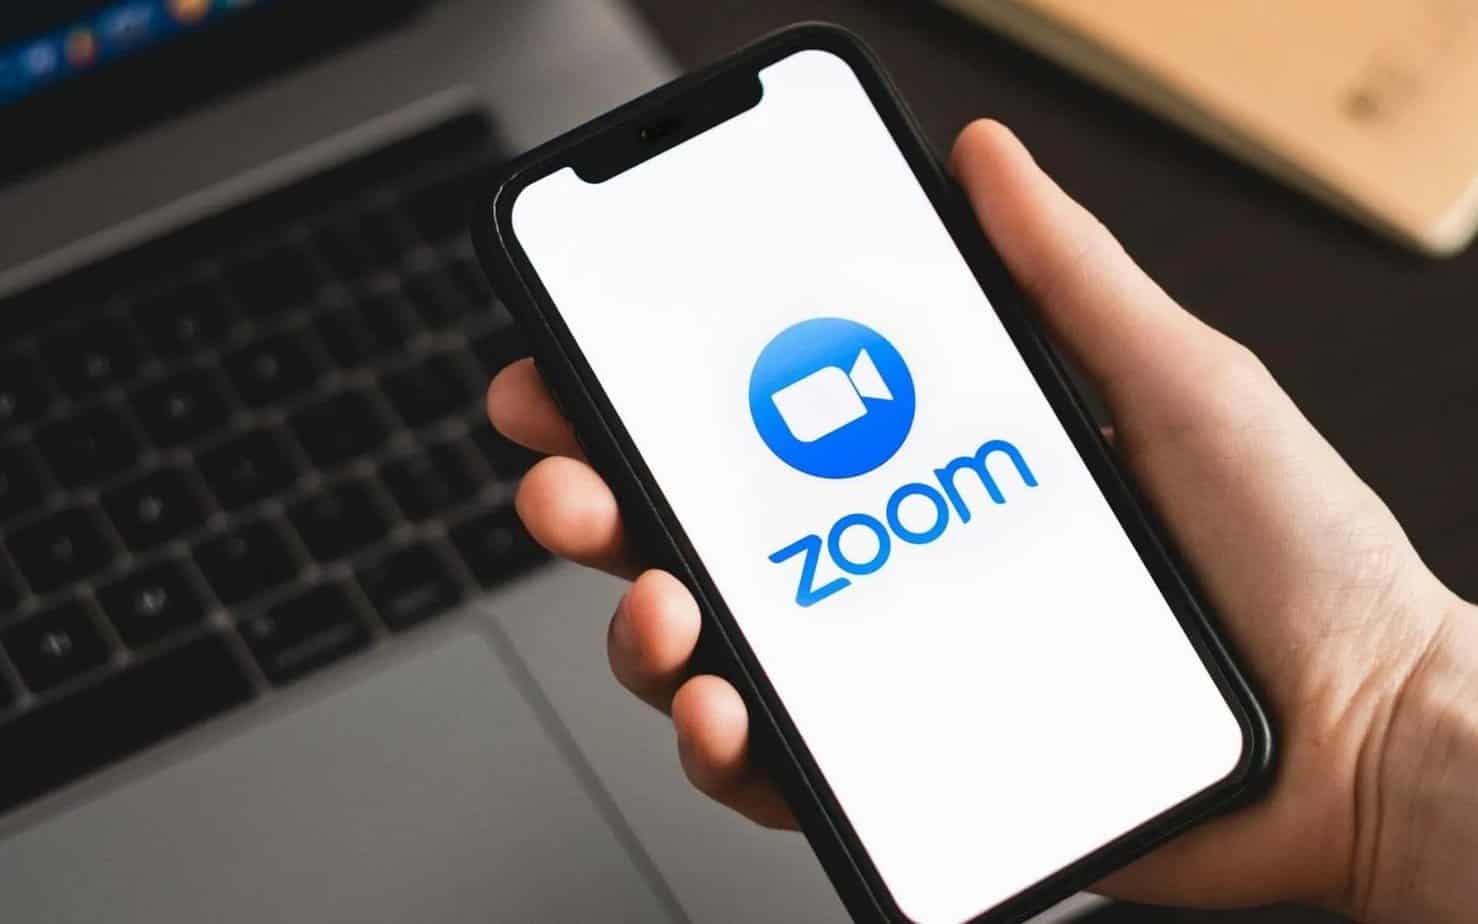 ZOOM SEES HUGE SURGE - Increase in demand for live video is helping some businesses